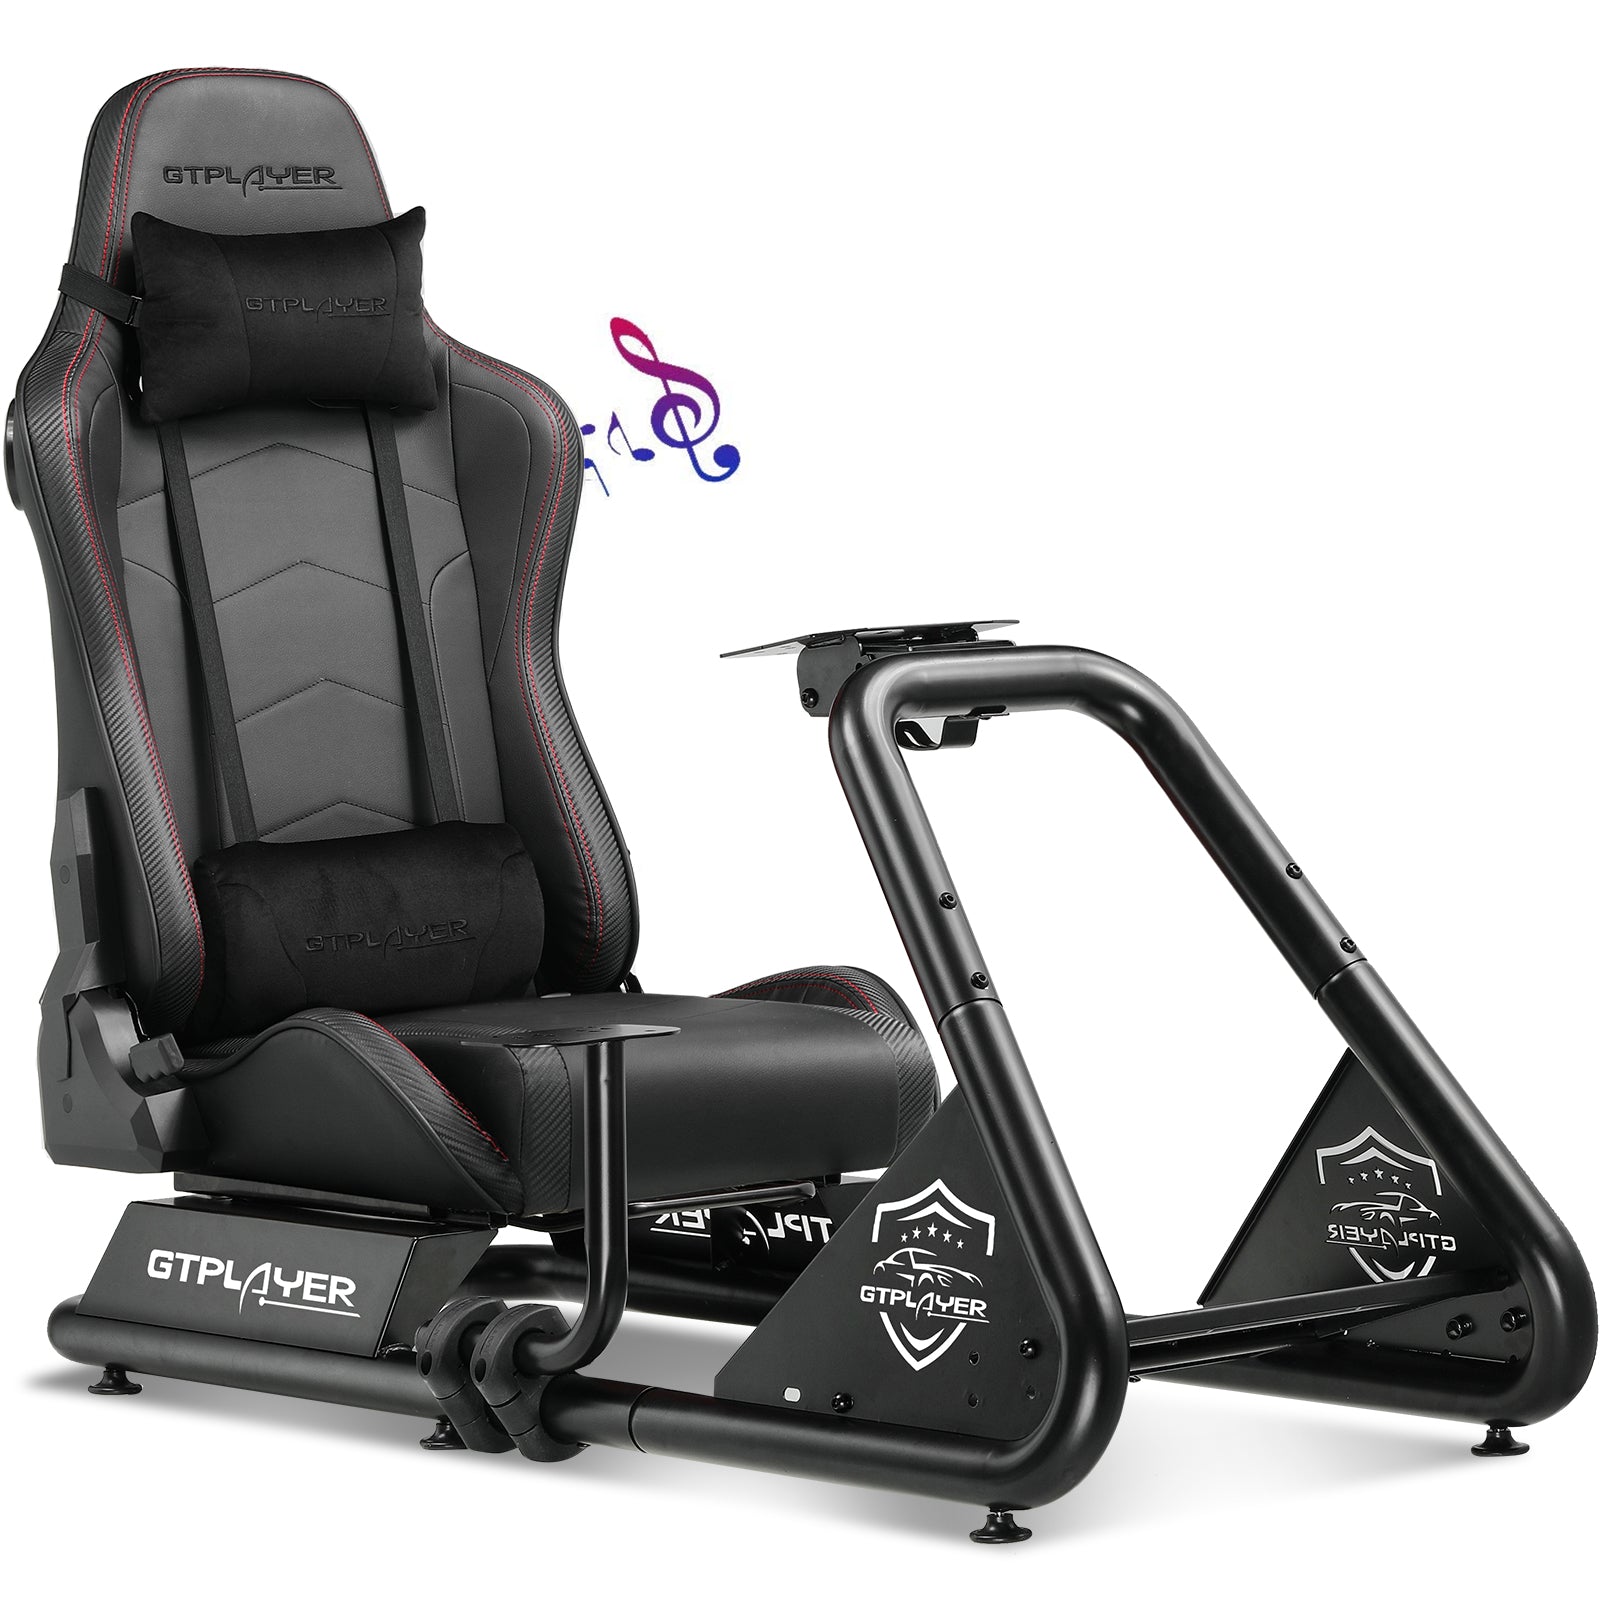 Gtplayer 2023 Racing Simulator Cockpit with GTRACING Seat and Bluetooth Speakers, Black